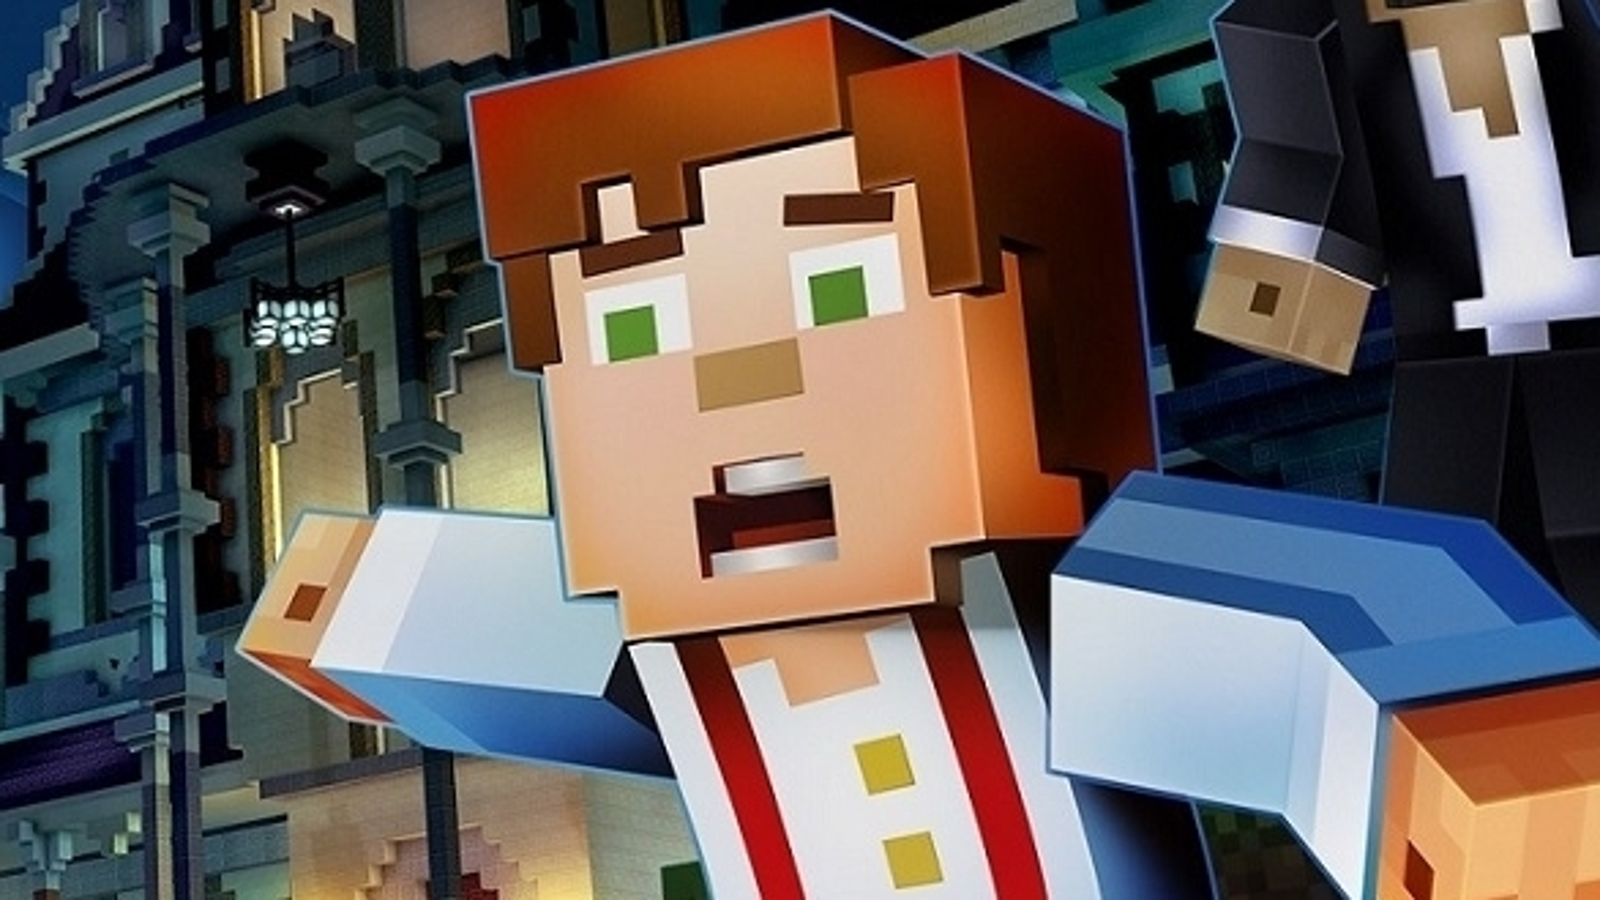 Why Are Minecraft: Story Mode Episodes Selling for $100 Each?